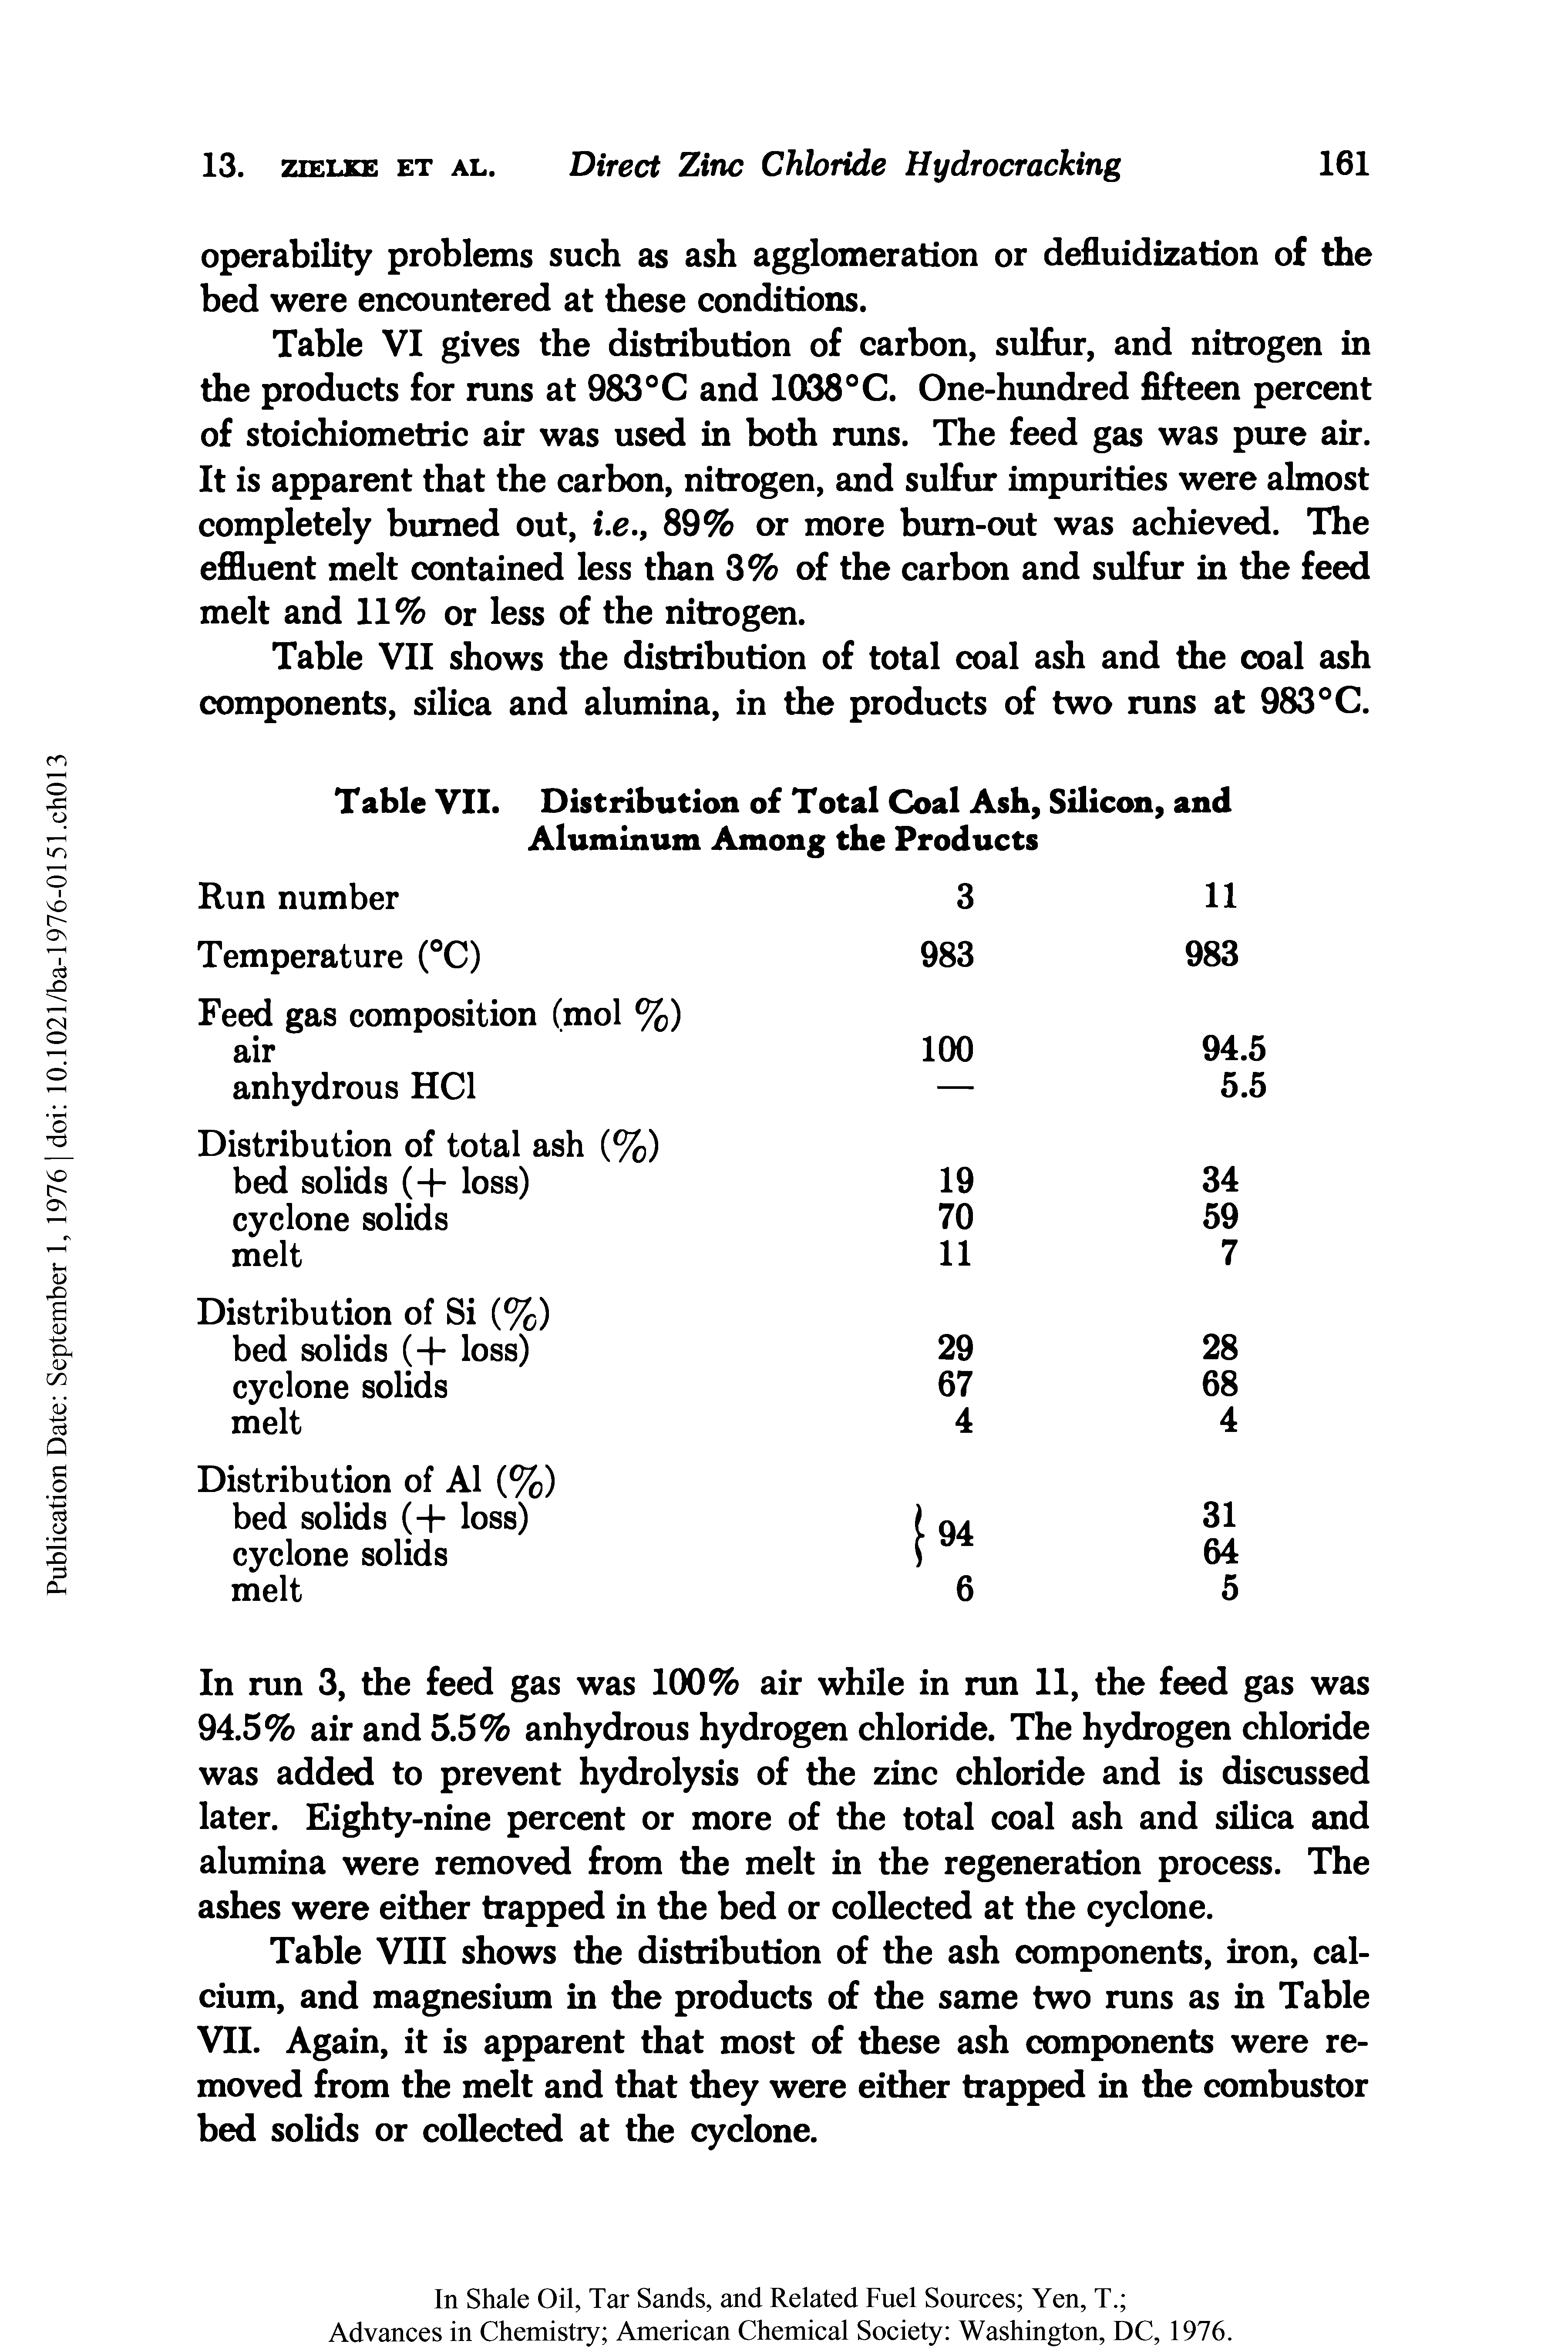 Table VI gives the distribution of carbon, sulfur, and nitrogen in the products for runs at 983°C and 1038°C. One-hundred fifteen percent of stoichiometric air was used in both runs. The feed gas was pure air. It is apparent that the carbon, nitrogen, and sulfur impurities were almost completely burned out, i.e., 89% or more burn-out was achieved. The effluent melt contained less than 3% of the carbon and sulfur in the feed melt and 11% or less of the nitrogen.